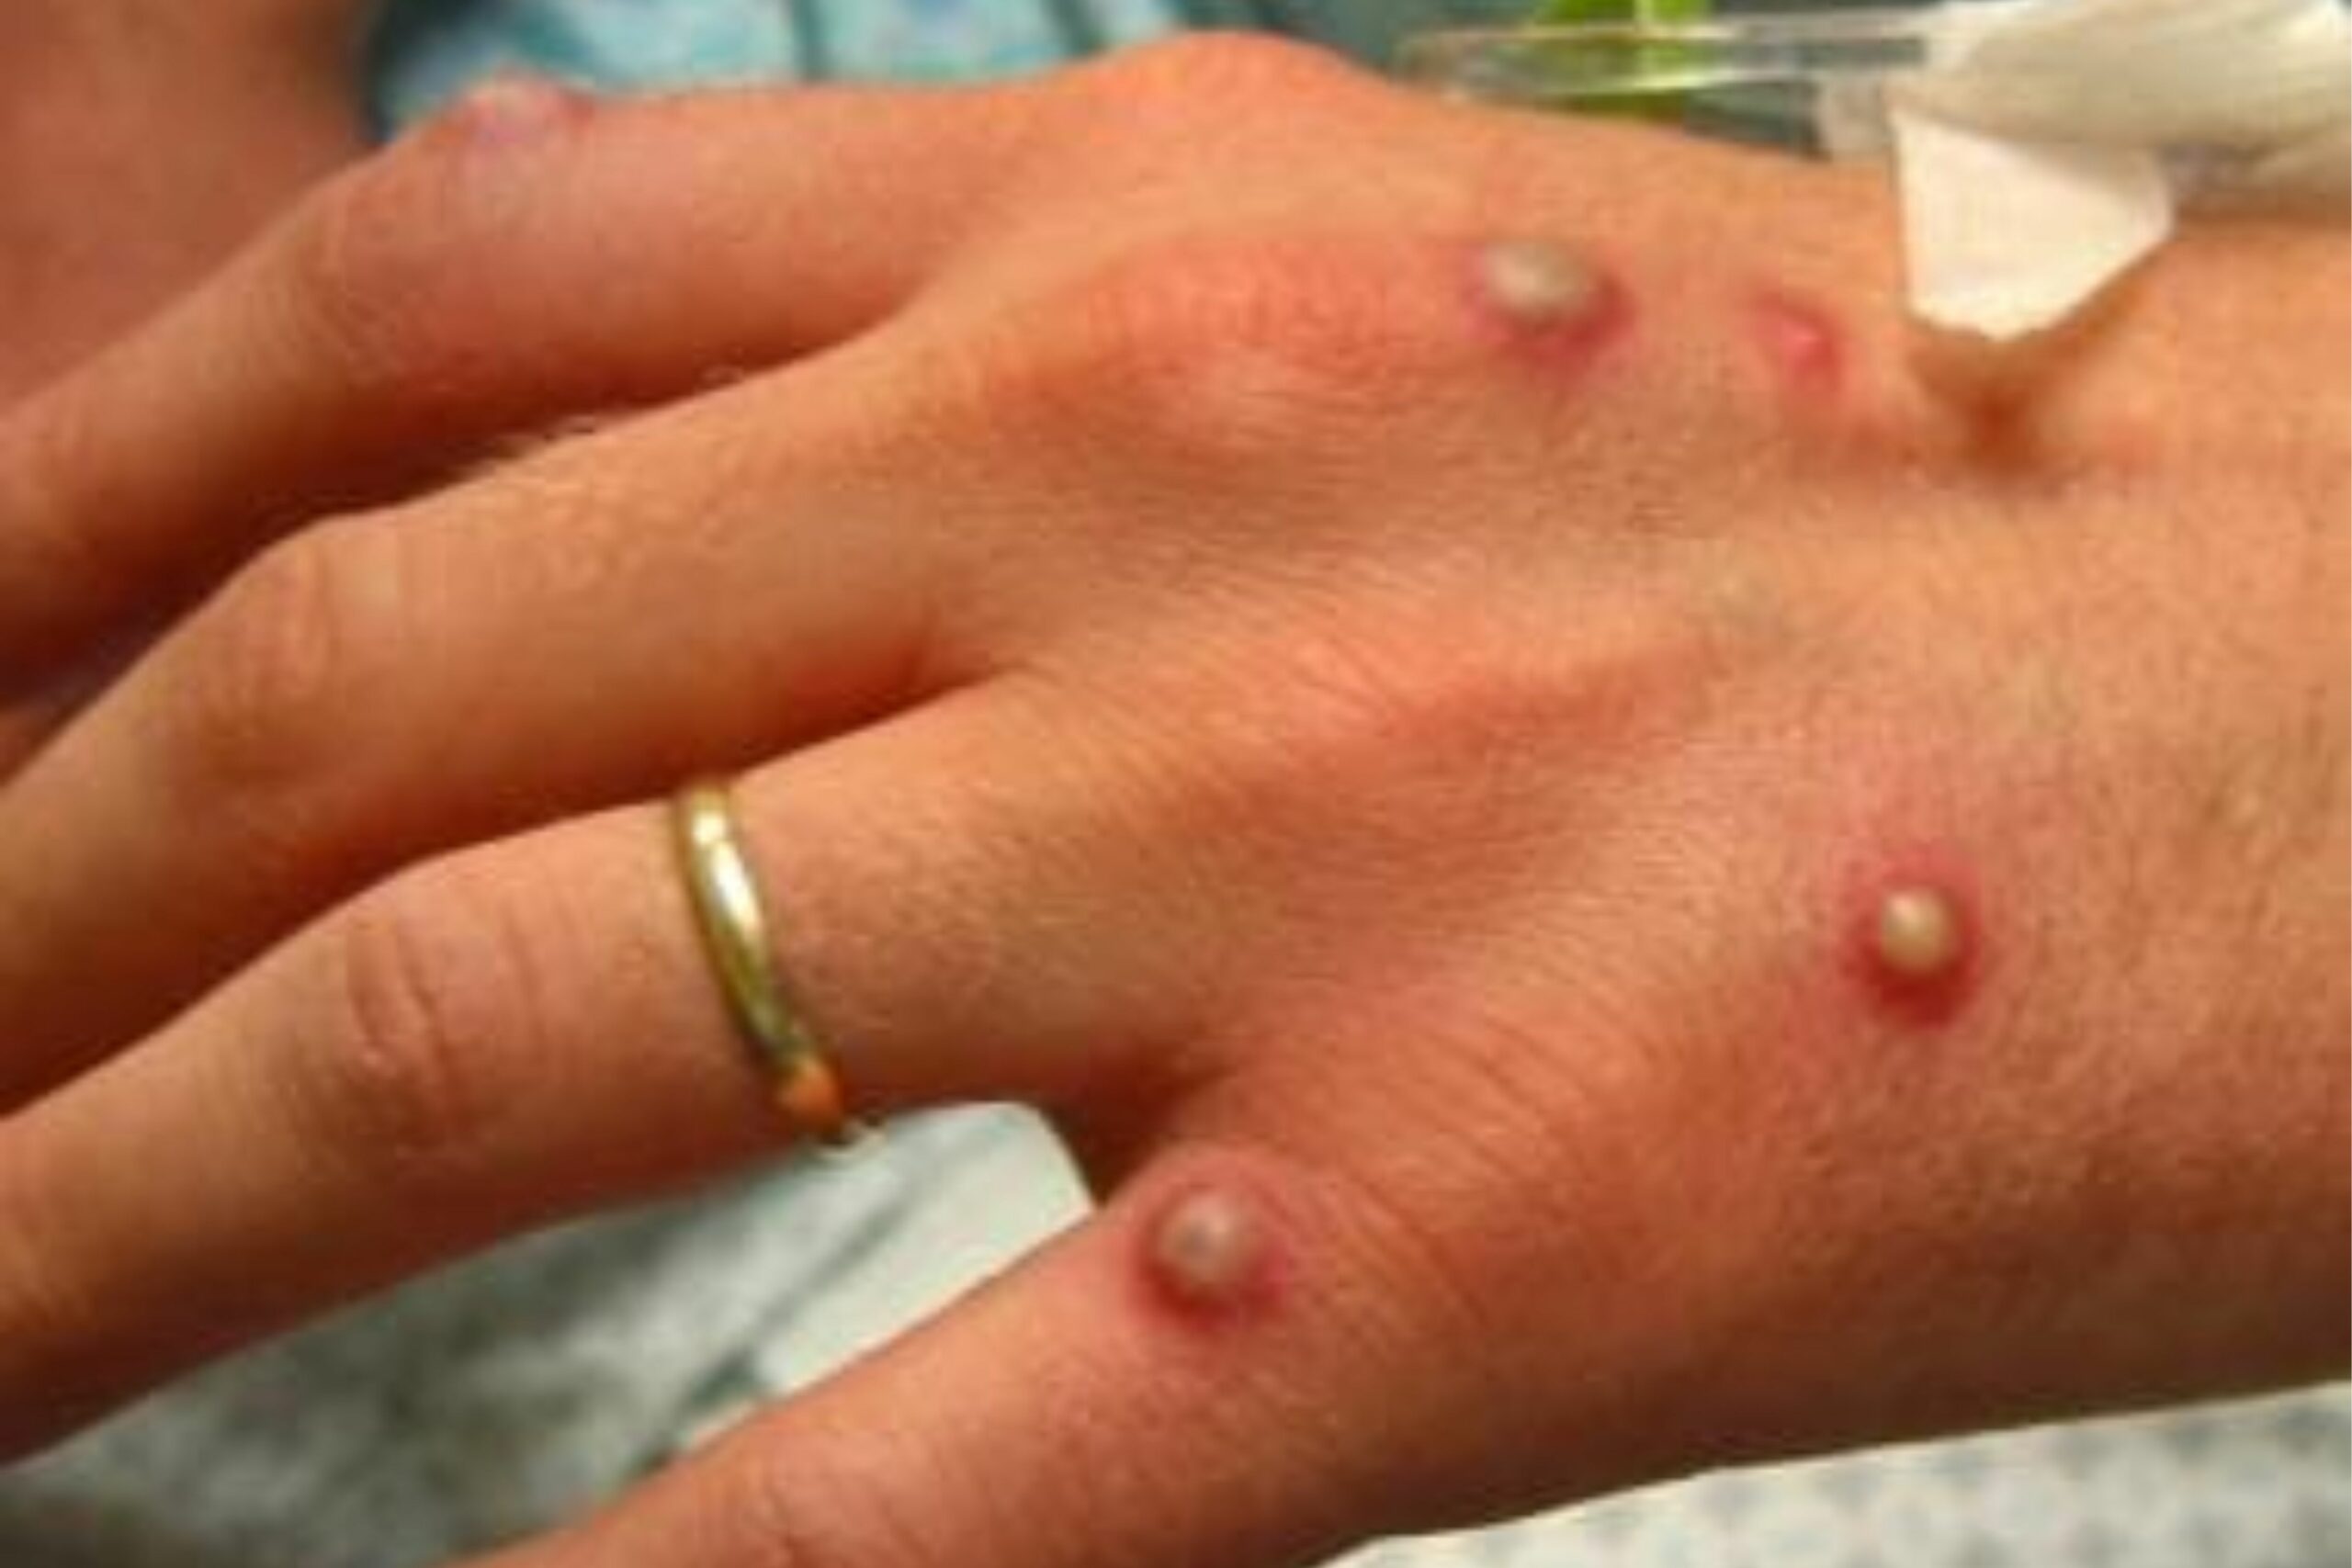 The First Suspected Case Of Monkeypox In Lake County Has Been Reported!